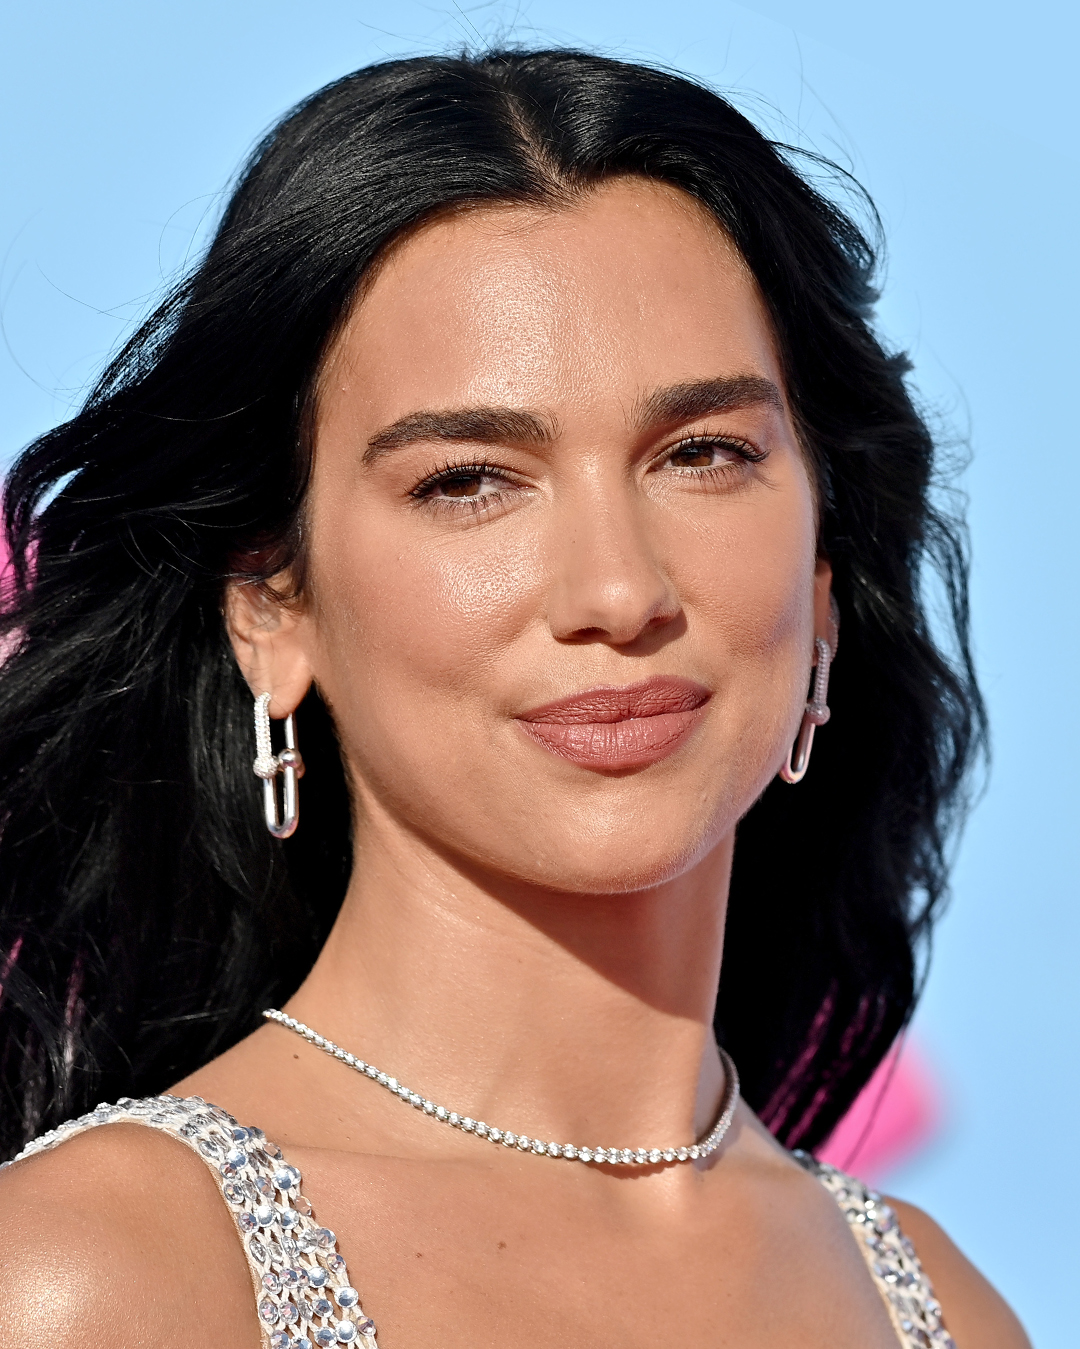 Dua Lipa wears Tiffany & Co. natural diamonds at the world premiere of "Barbie" on July 09, 2023 in Los Angeles, California.